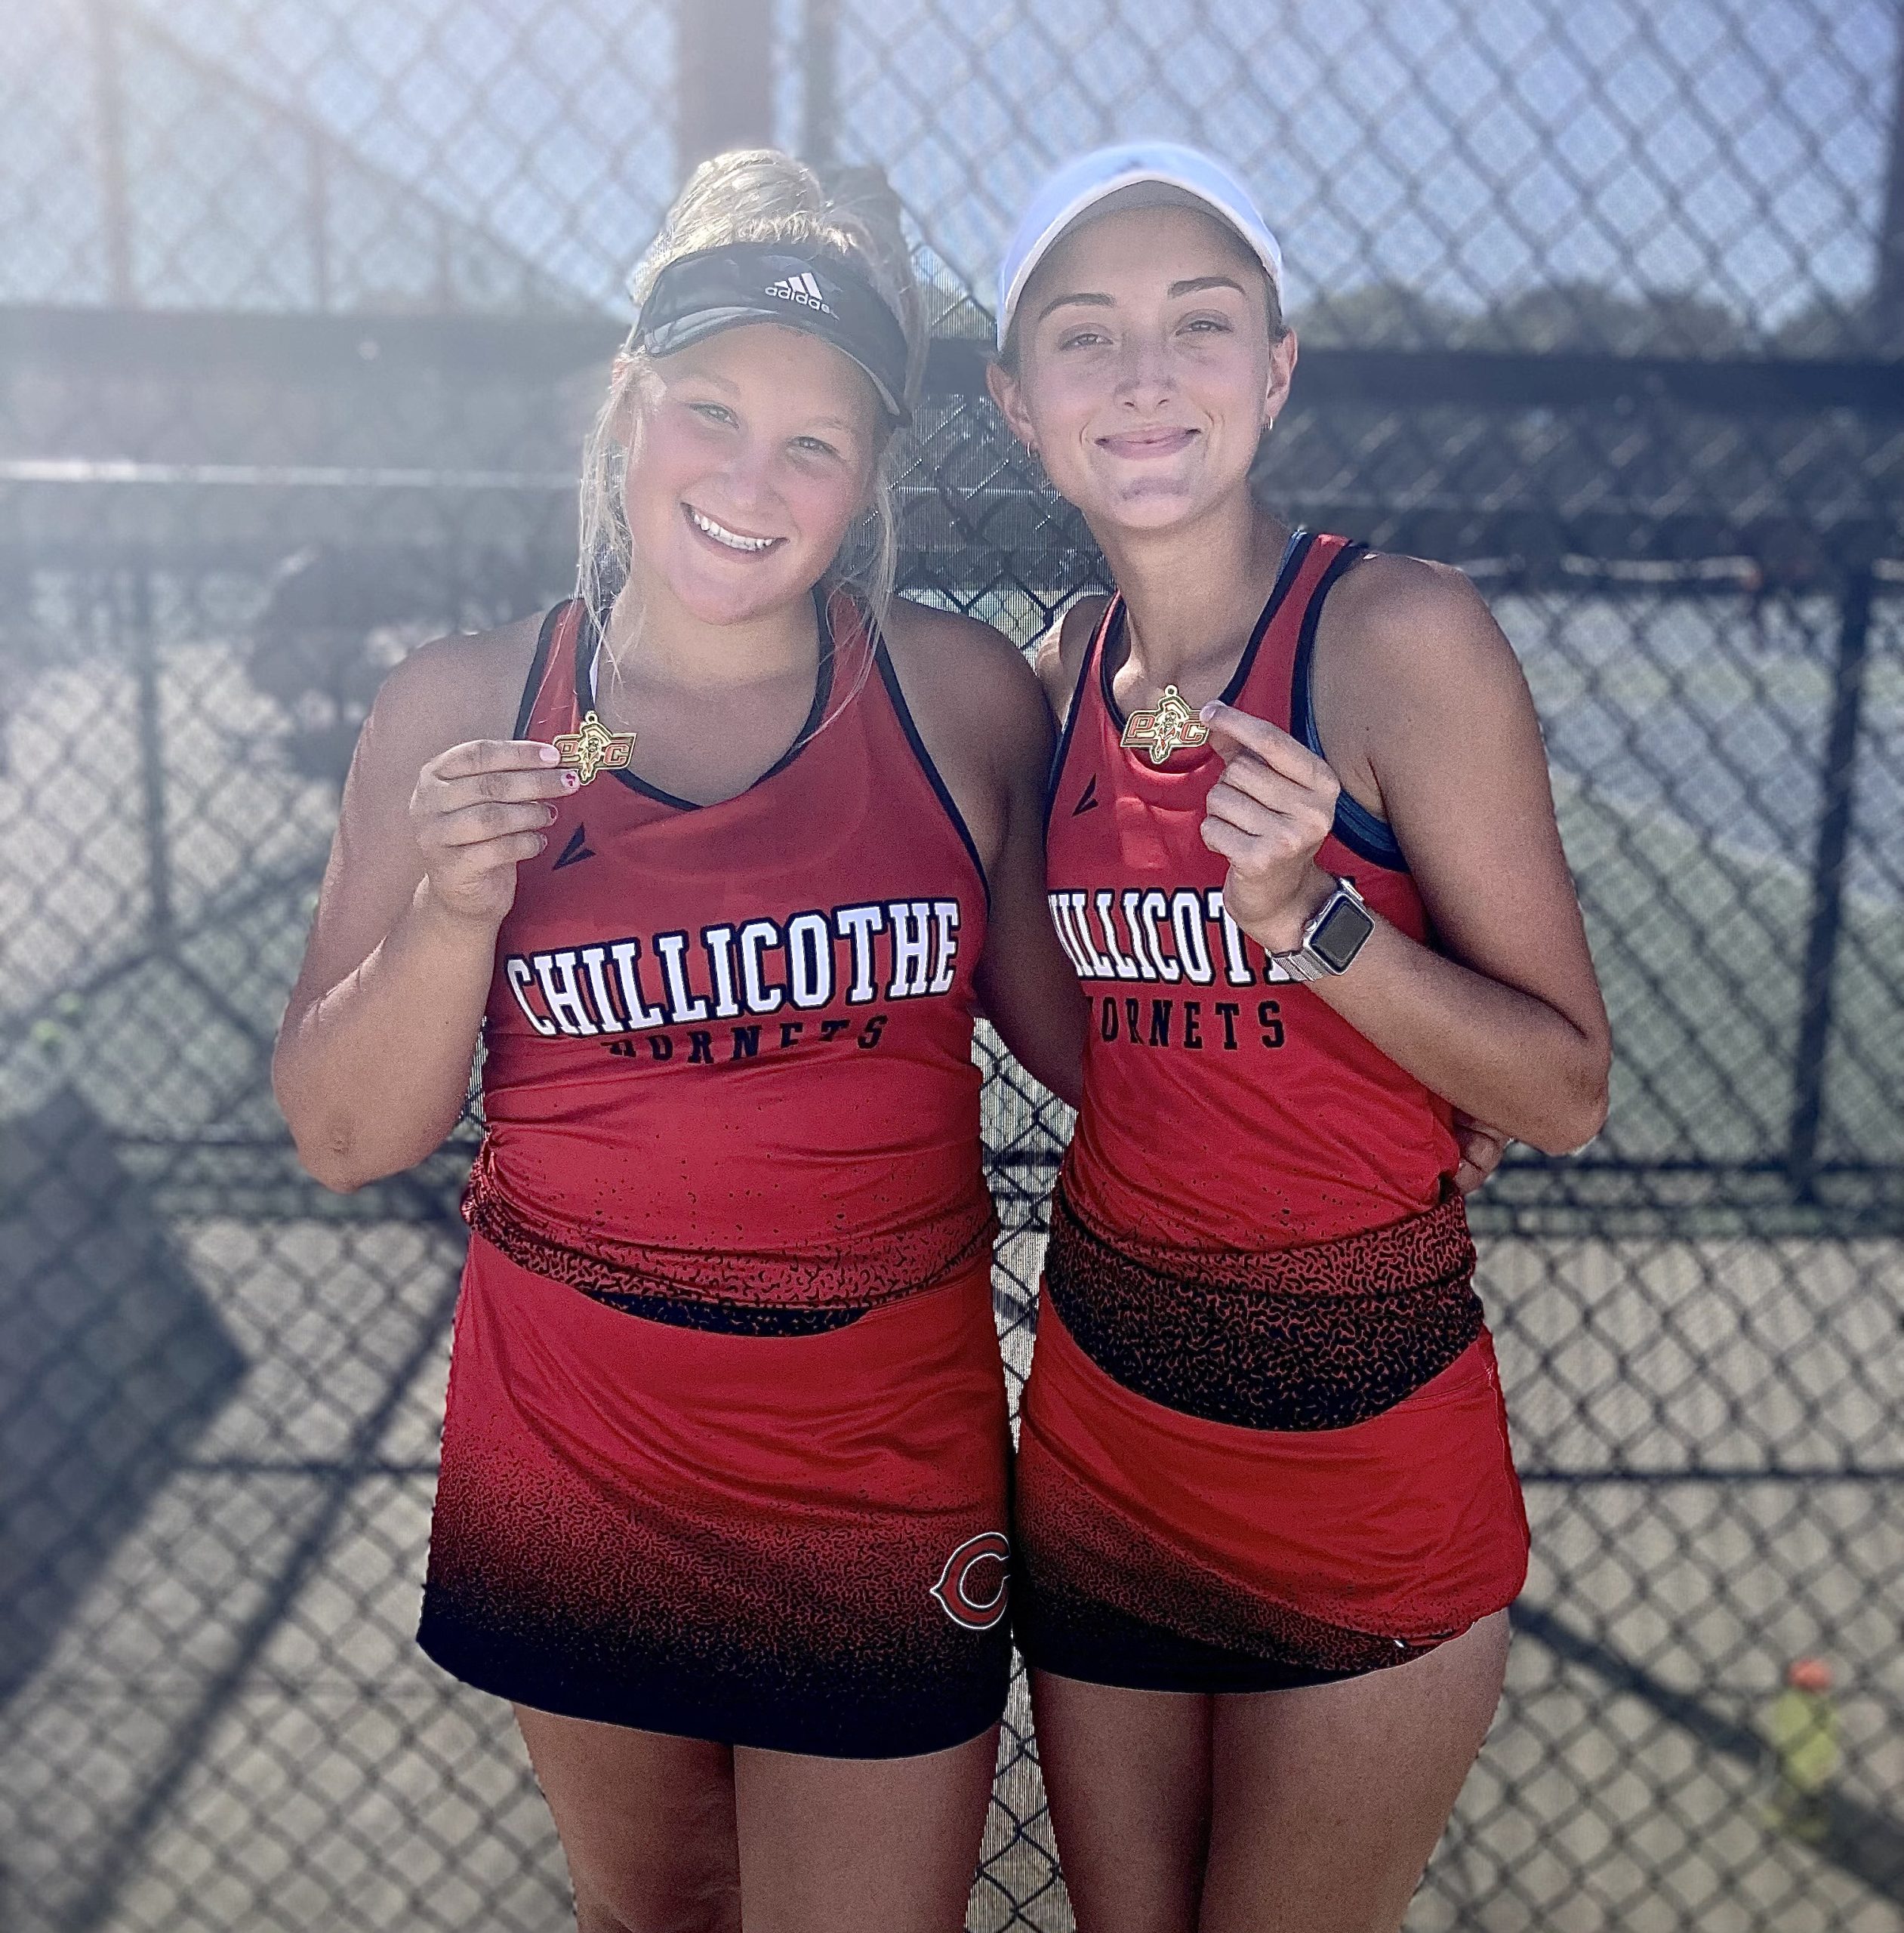 Washburn and Garr Dominate Doubles Championship and Lead Team to 13 Match Wins at New Platte County Tourney